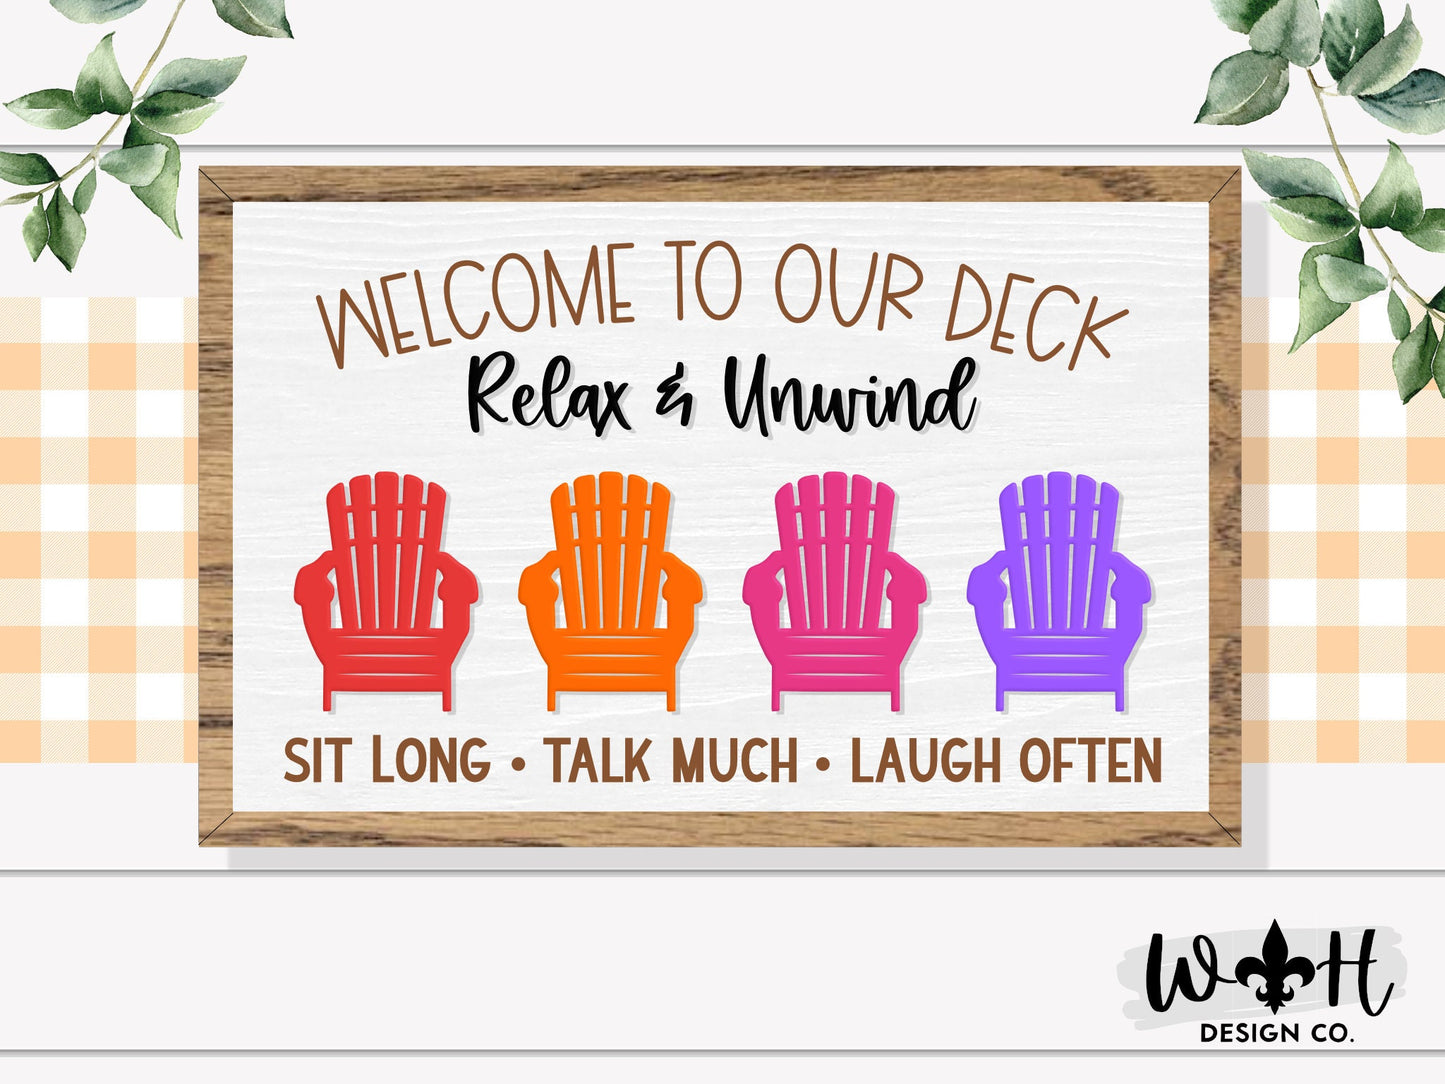 Welcome To Our Deck Relax and Unwind - Seasonal Coffee Bar Sign - Modern Farmhouse Sign - Home and Kitchen Decor - Wood Framed Wall Art